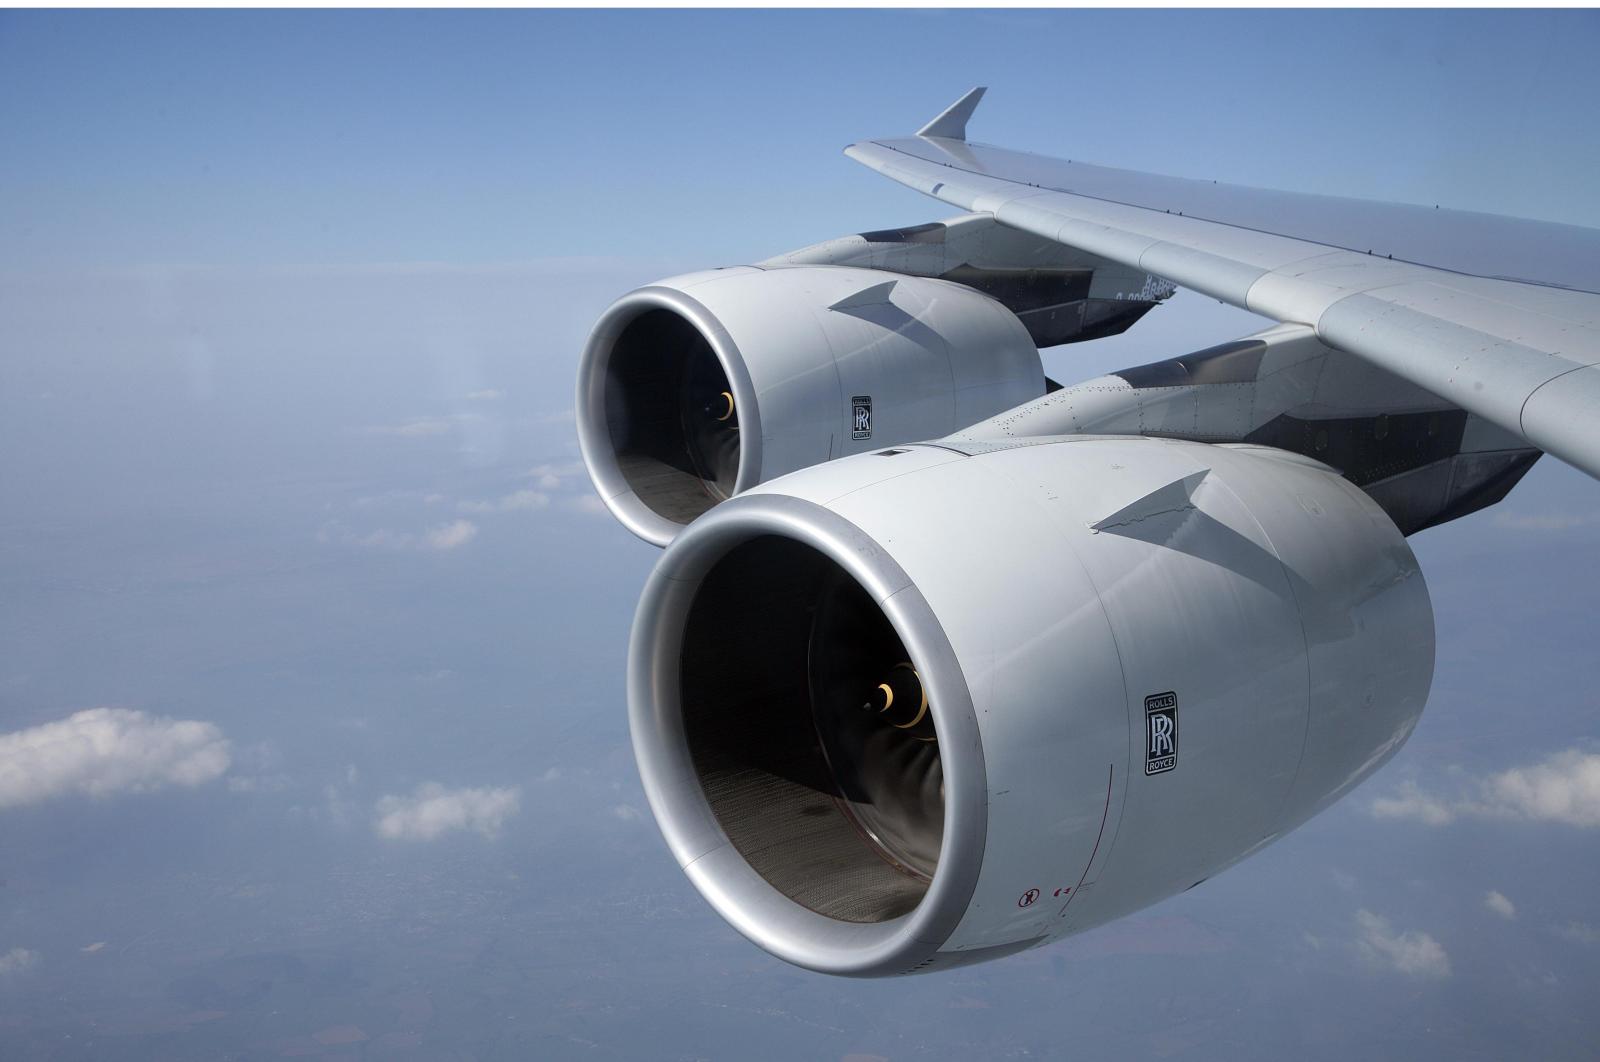 The Trent 900 powers the Airbus A380 